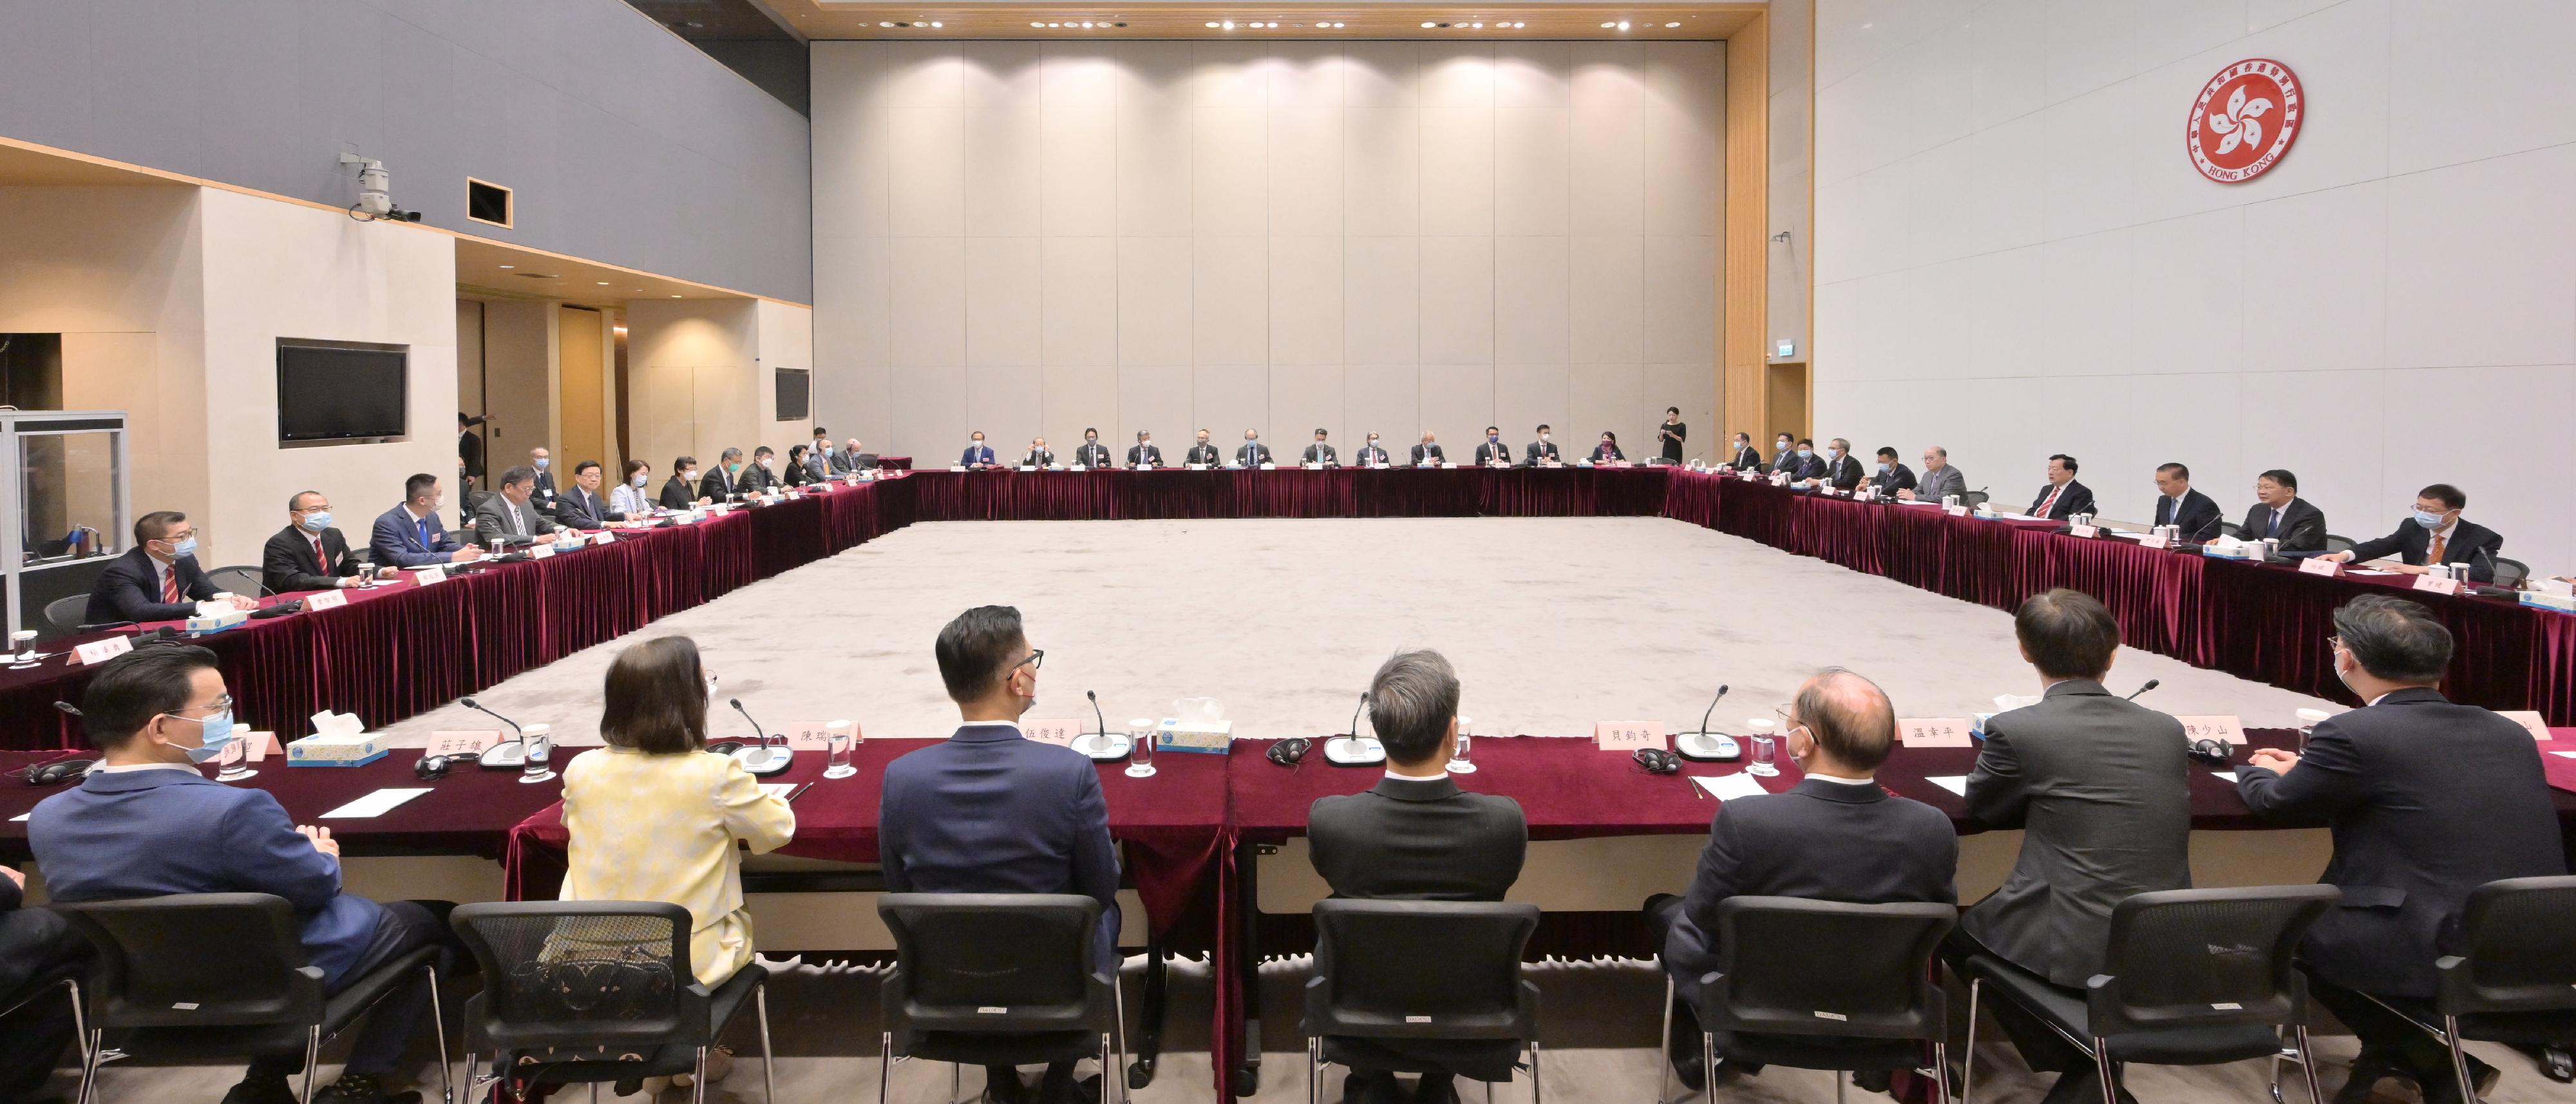 The Vice Chairman of the 13th Chinese People's Political Consultative Conference and Director of the Hong Kong and Macao Affairs Office of the State Council, Mr Xia Baolong, continued his visit in Hong Kong for a fifth day on April 17. Photo shows Mr Xia (fourth right), accompanied by the Chief Executive, Mr John Lee (fifth left), and the Secretary for Commerce and Economic Development, Mr Algernon Yau (fourth left), meeting with representatives of local and foreign business chambers and listening to their views.